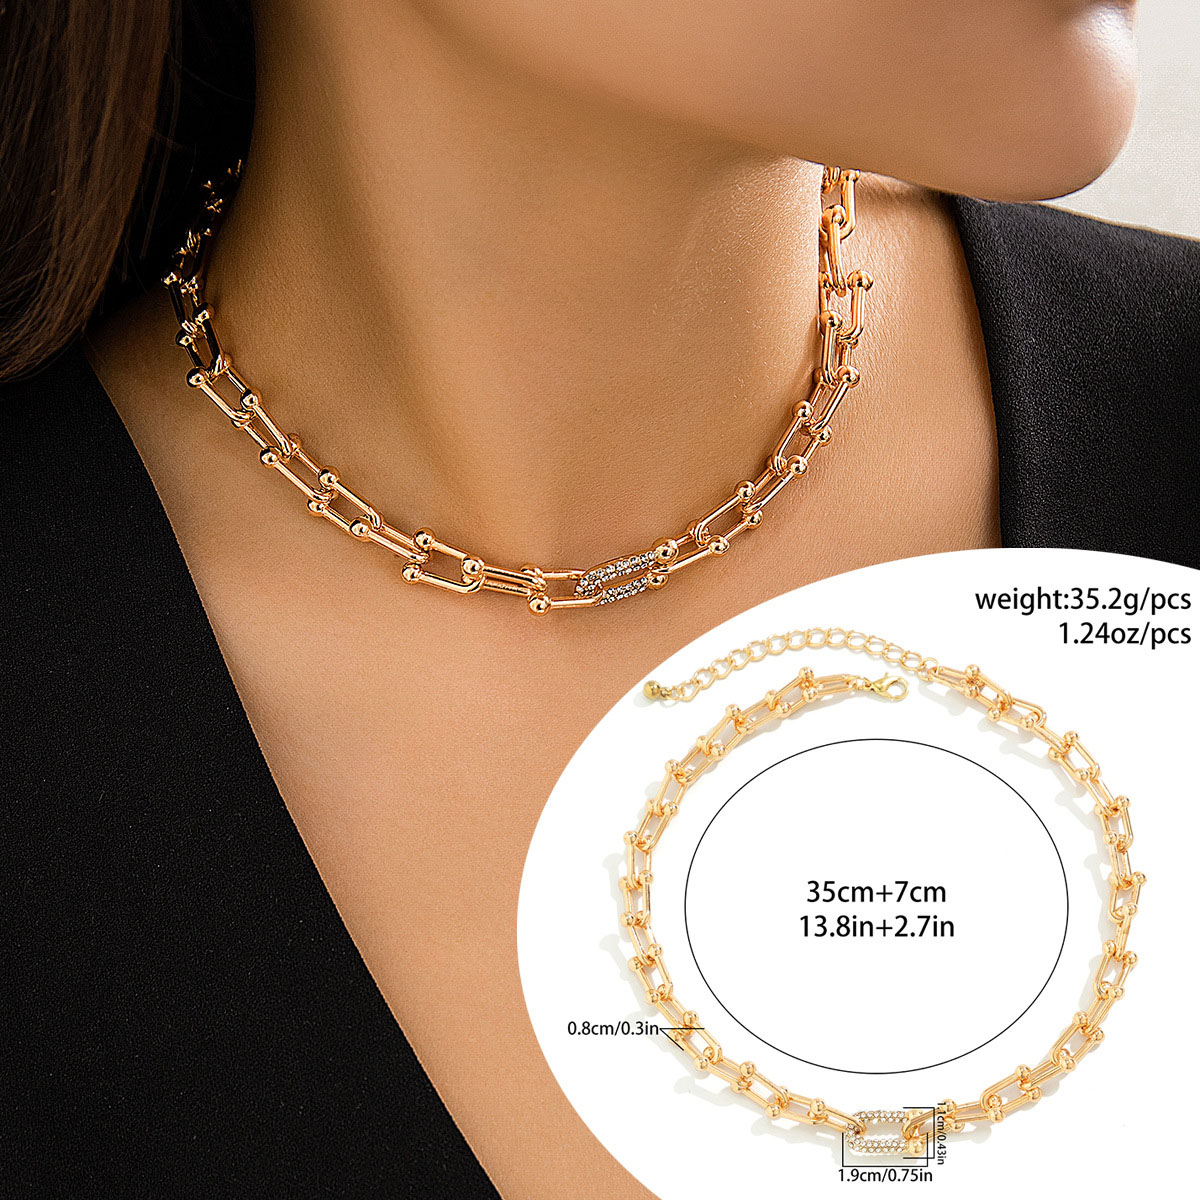 3:Gold 6210 necklace